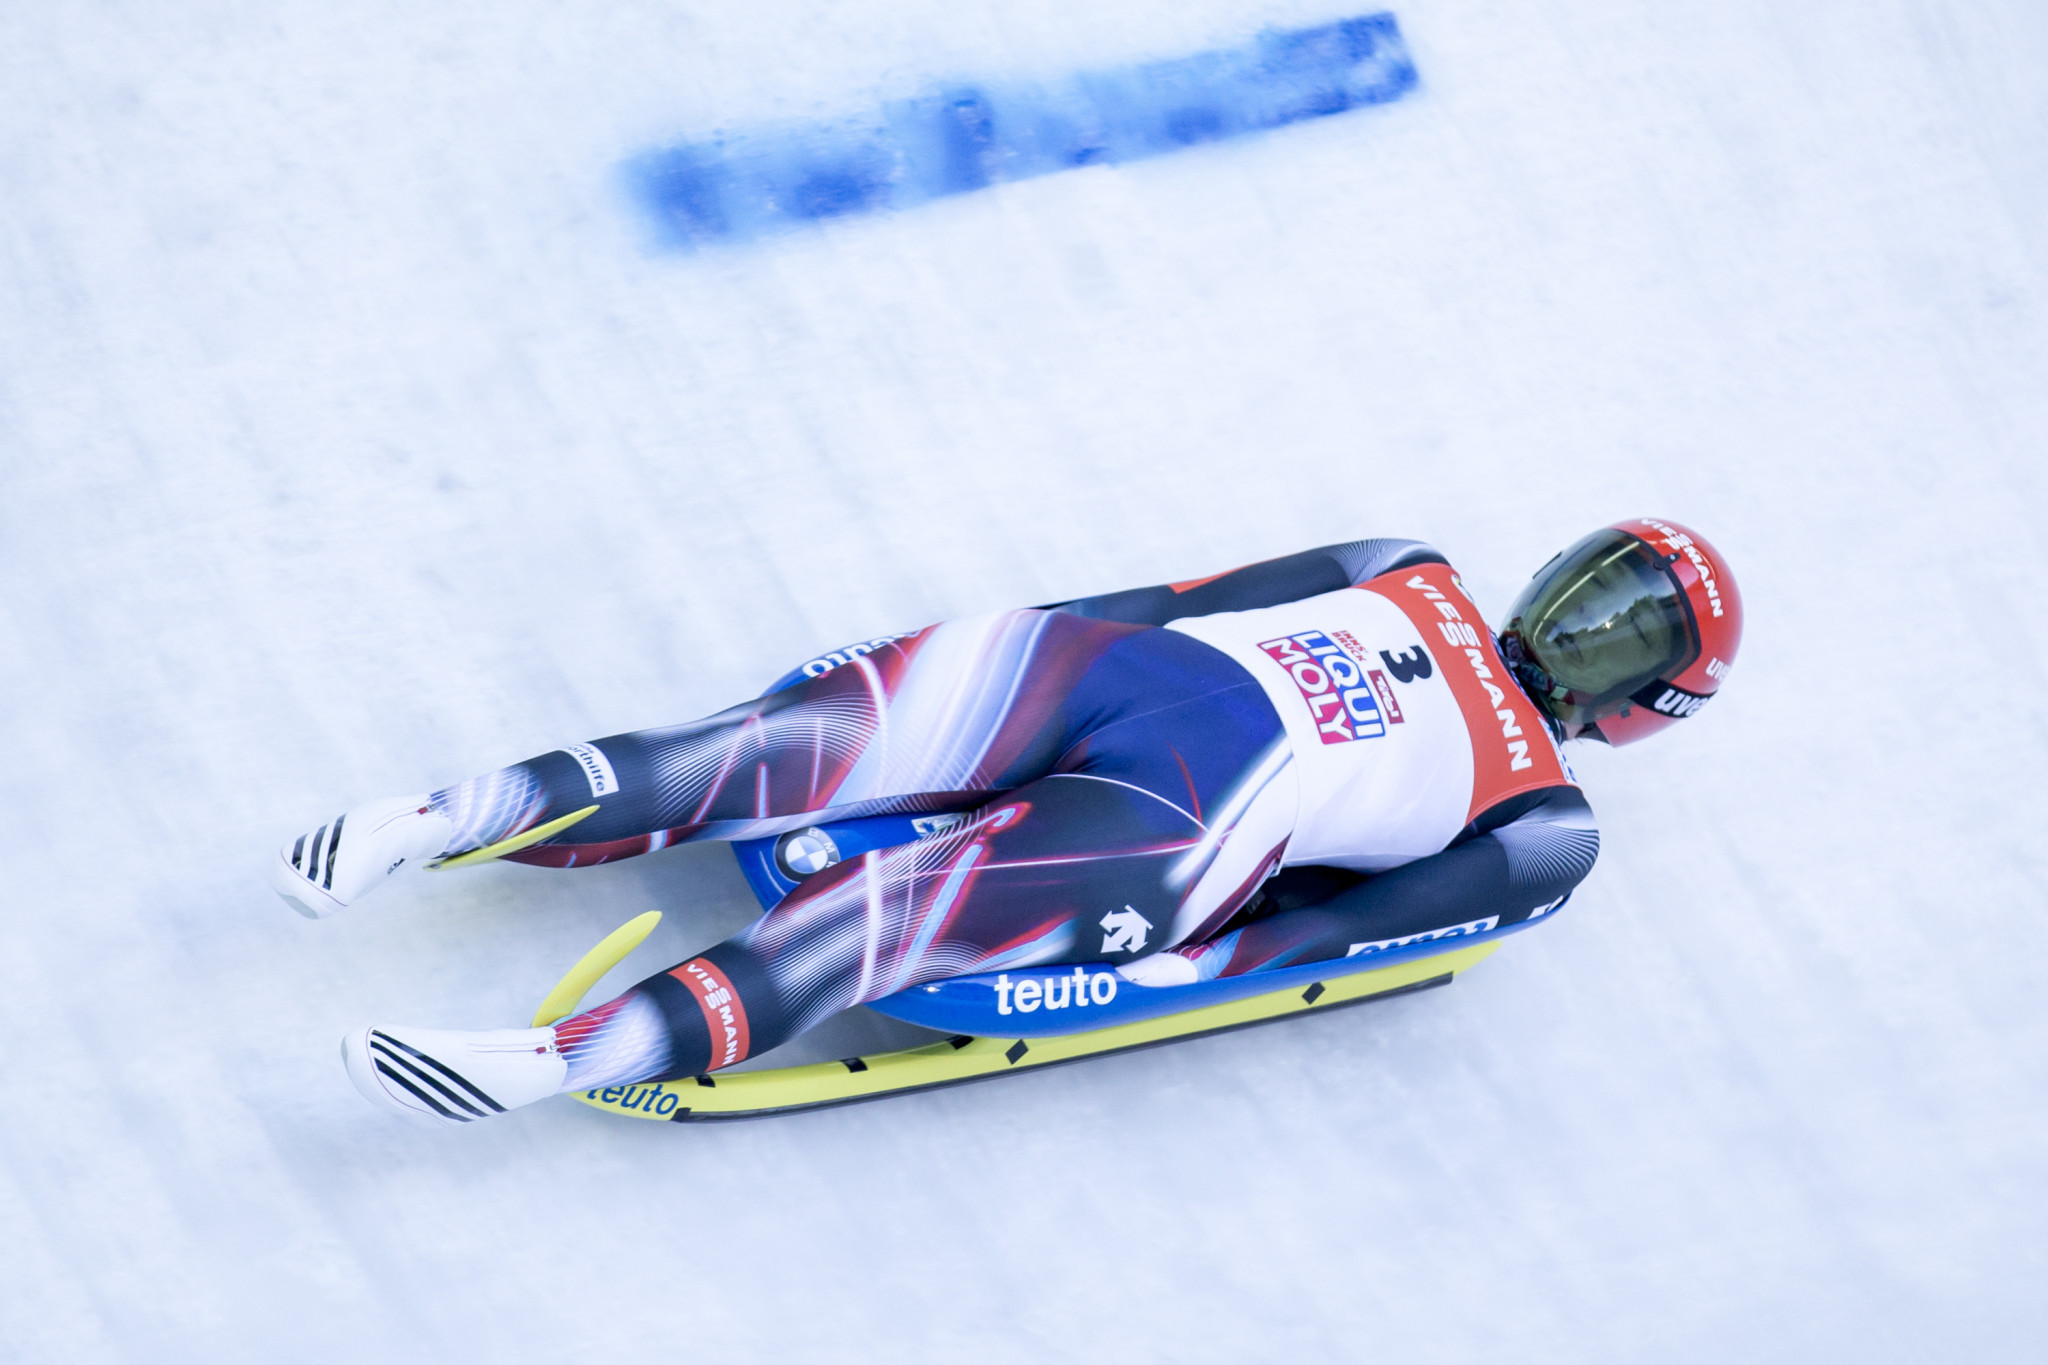 Hüfner achieves record 38th Luge World Cup in Calgary